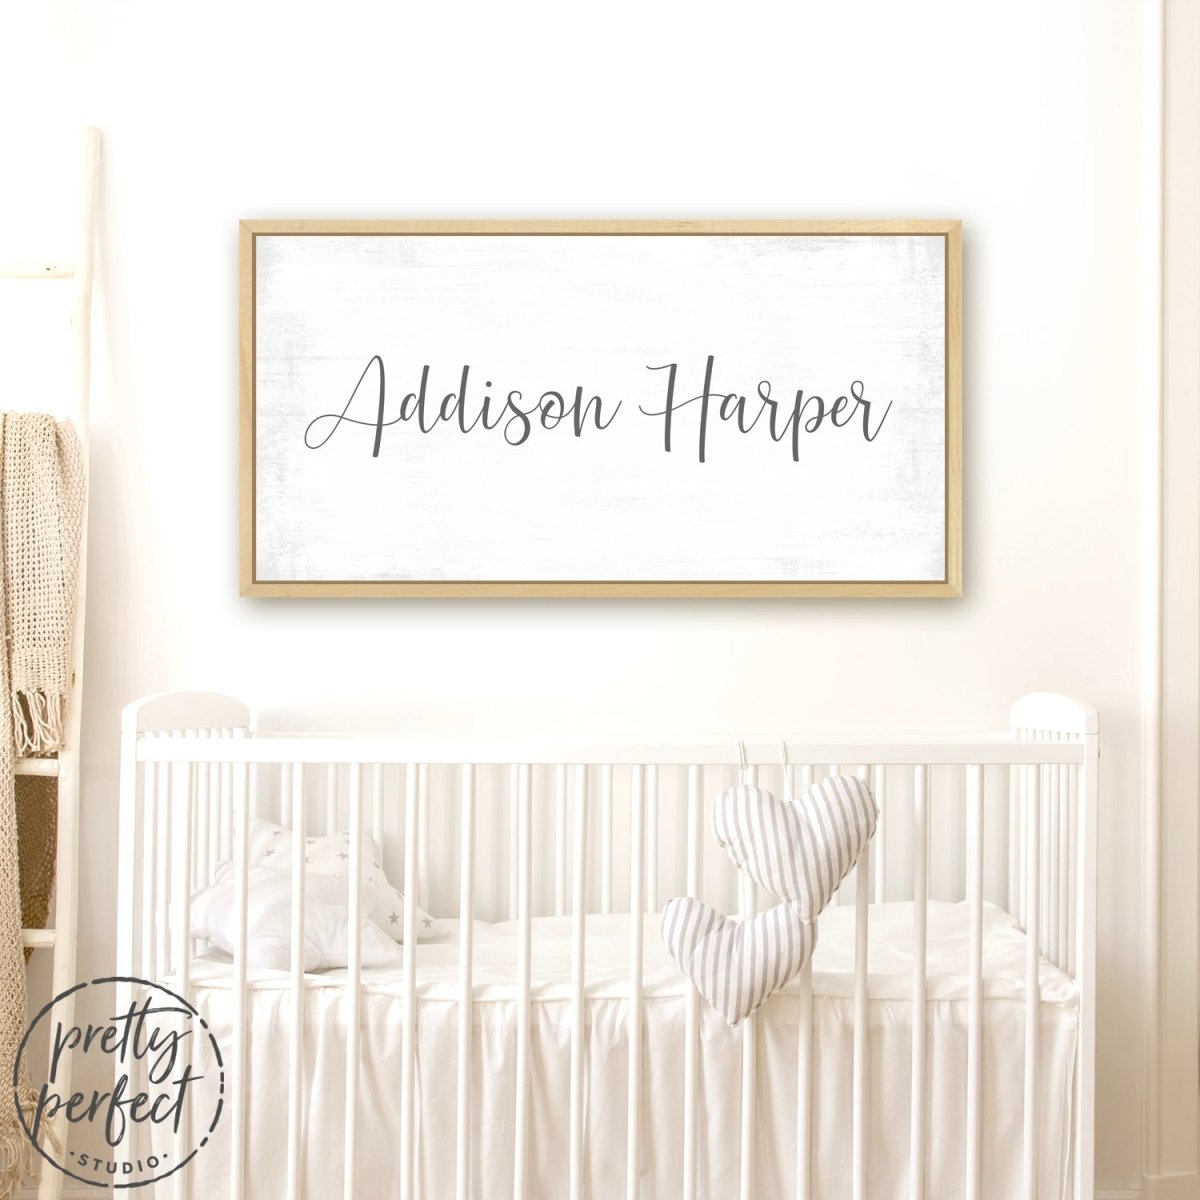 Baby Girl's Personalized Name Canvas Wall Art for the Nursery Room Above Crib - Pretty Perfect Studio 